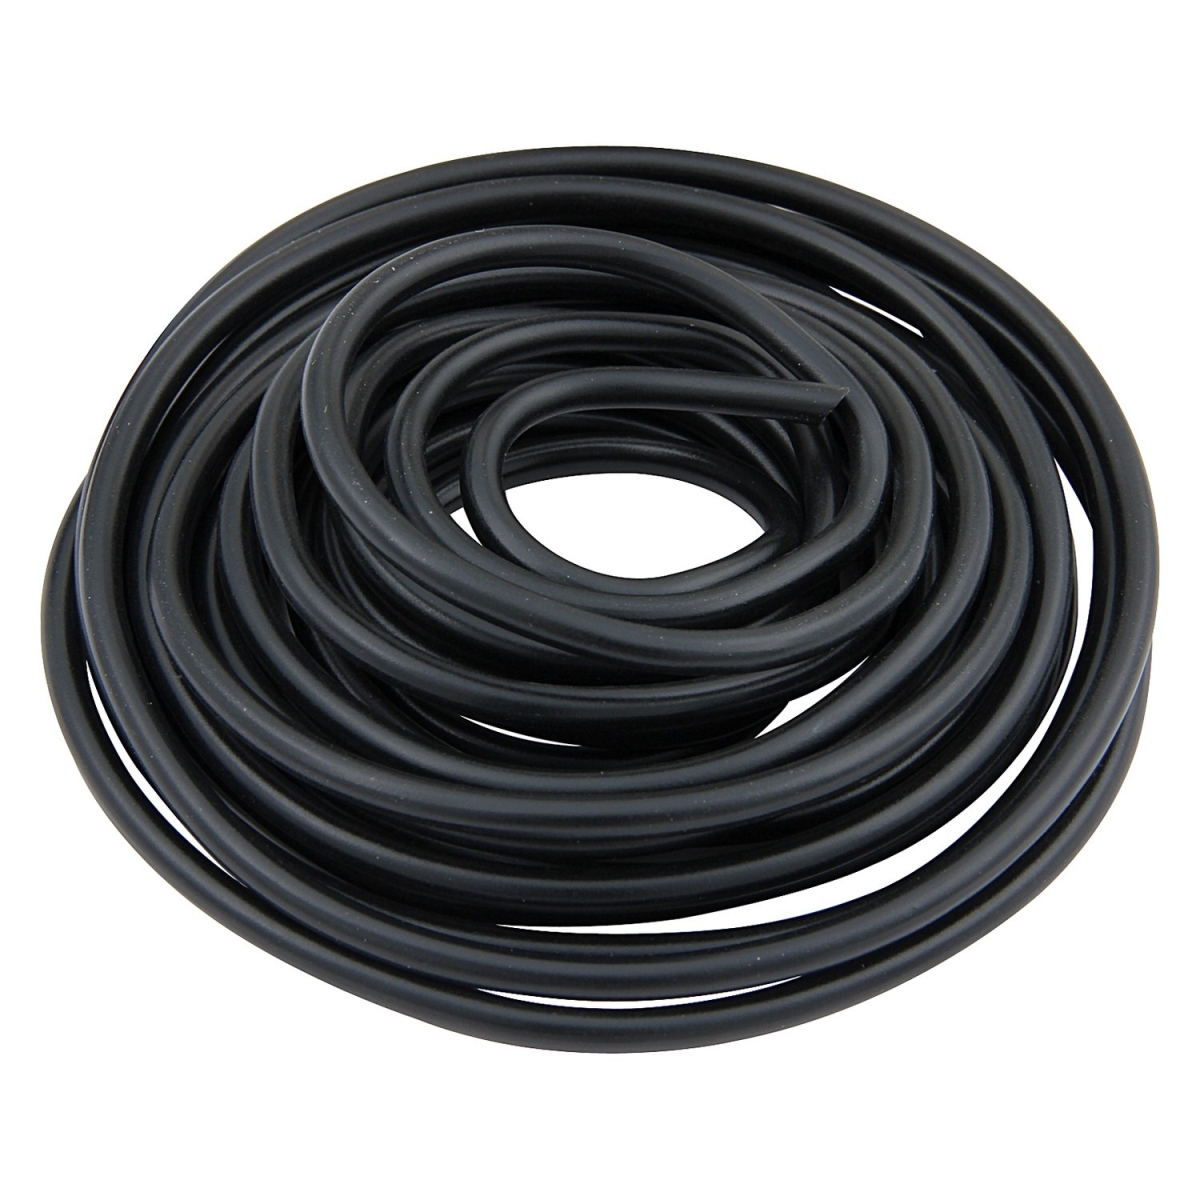 All76571 10 Ft. 10 Awg Black Primary Wire